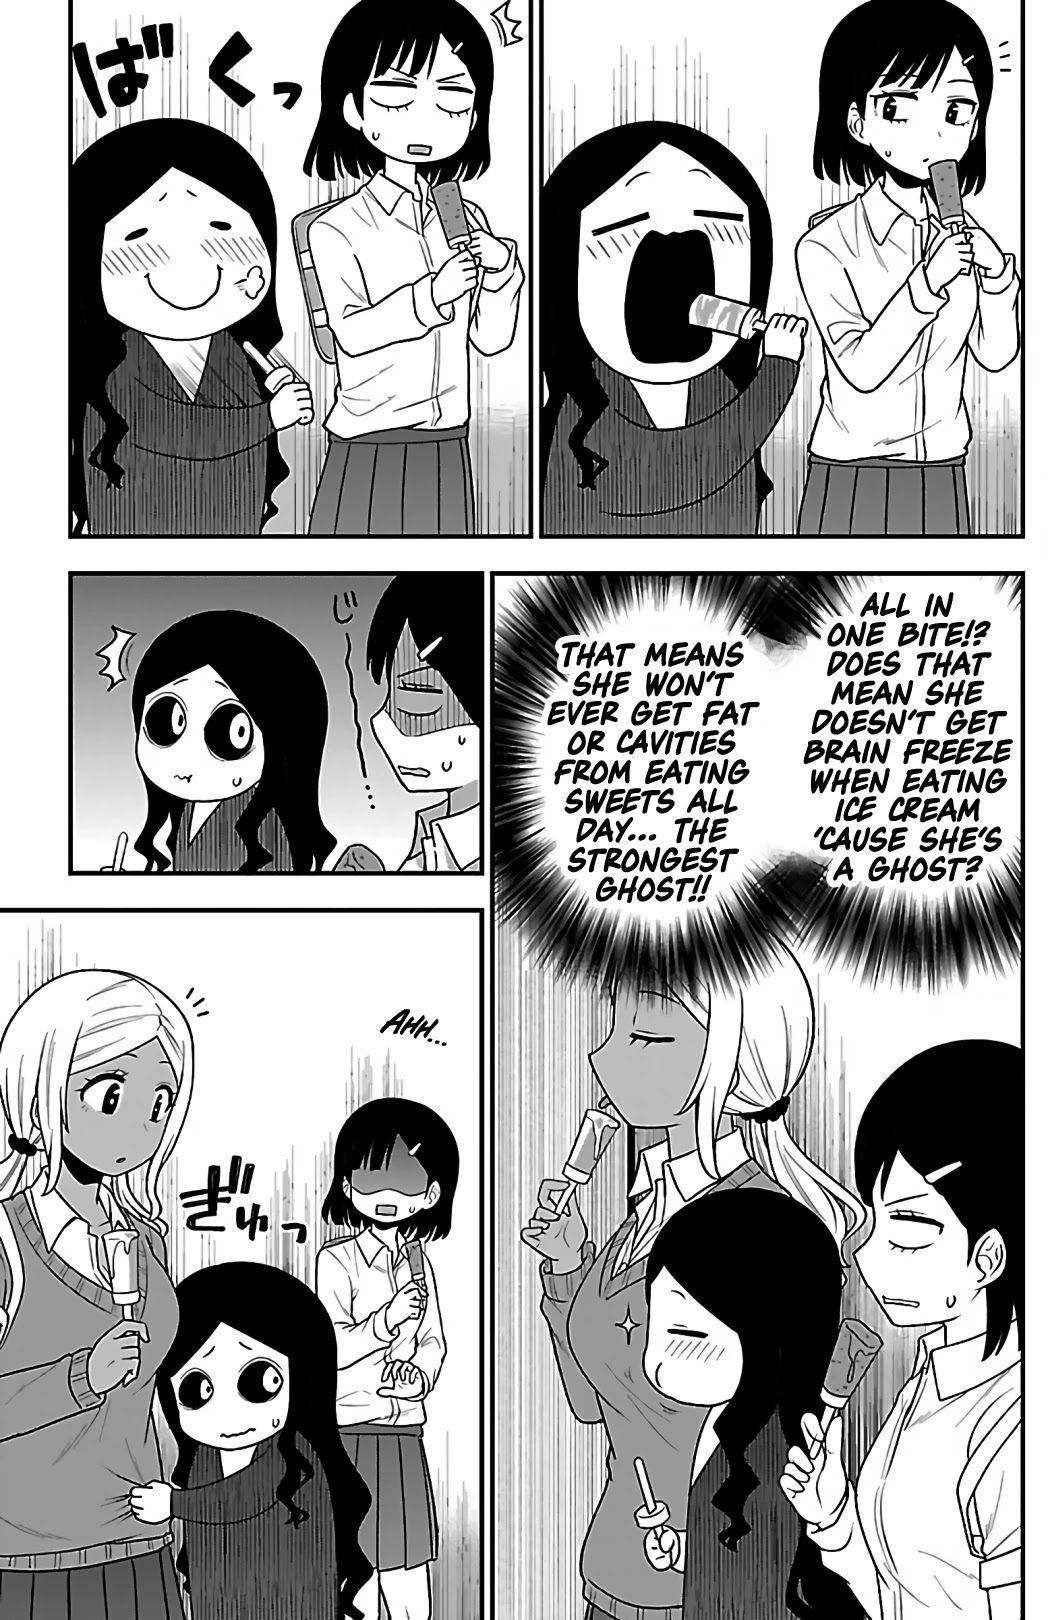 There's A Ghost Behind That Gyaru - chapter 4 - #3